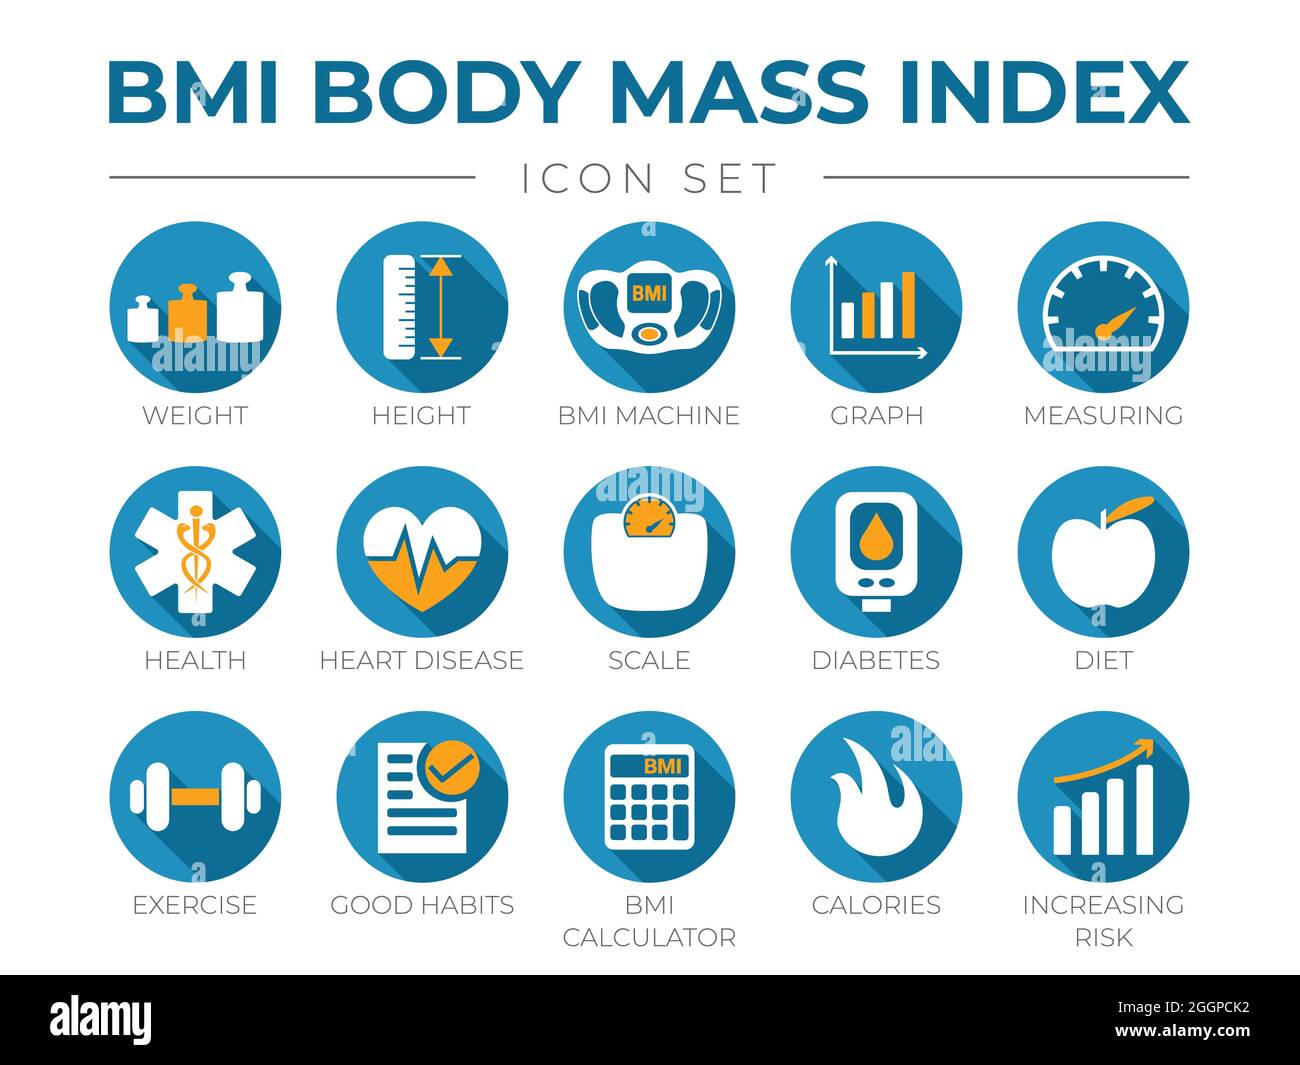 https://c8.alamy.com/comp/2GGPCK2/bmi-body-mass-index-round-icon-set-of-weight-height-bmi-machine-graph-measuring-health-heart-disease-scale-diabetes-diet-exercise-habits-b-2GGPCK2.jpg